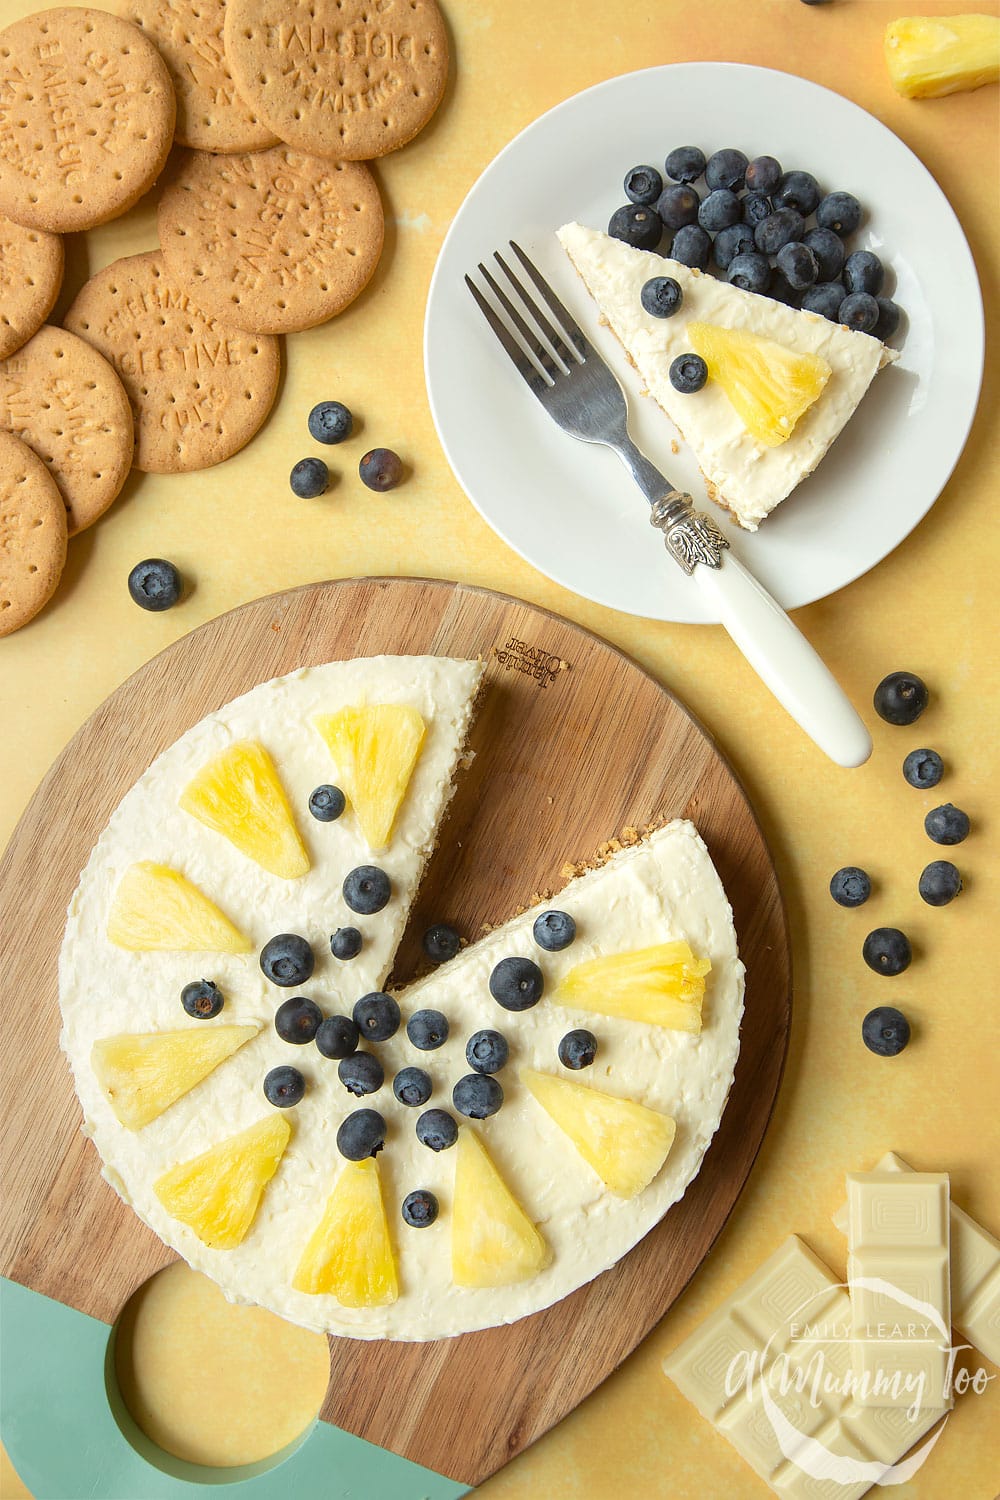 Extra special no-bake coconut cheesecake topped with pineapple pieces and blueberries. Served to a board with a slice on a plate.